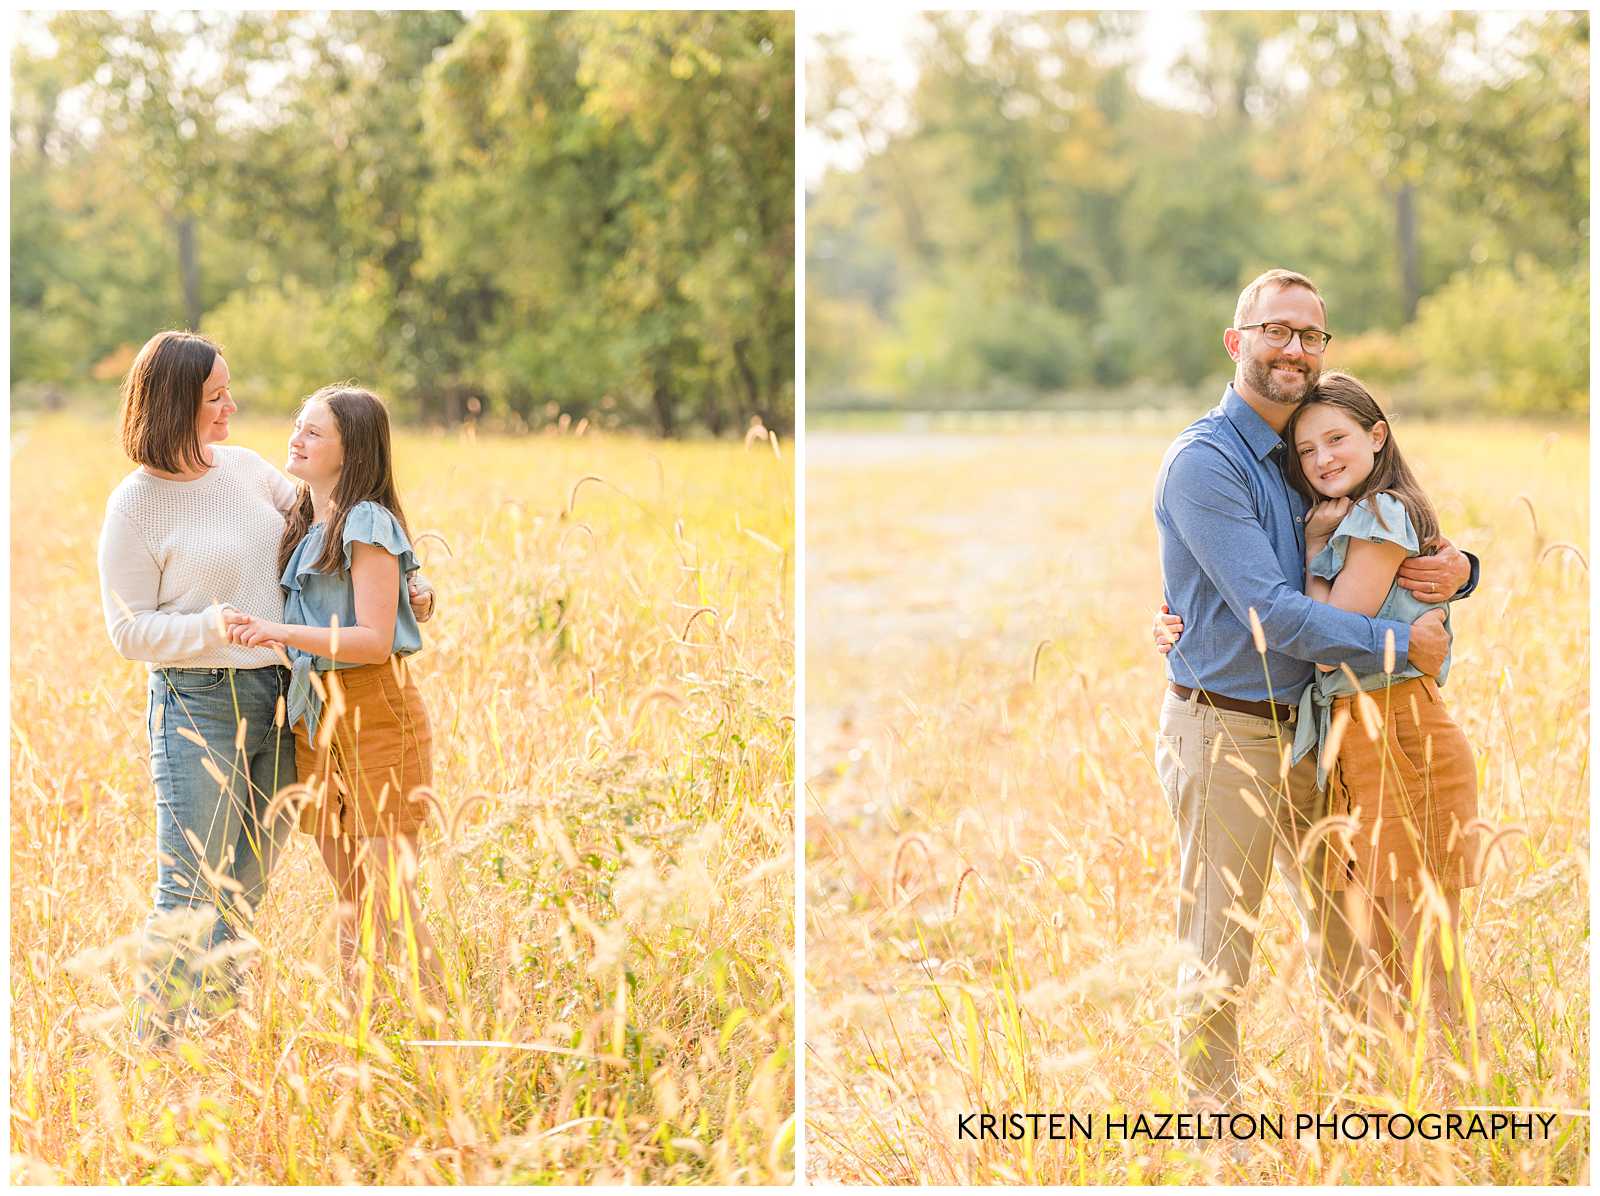 Mom, Dad, and daughter in a field of cattails by River Forest, IL photographer Kristen Hazelton